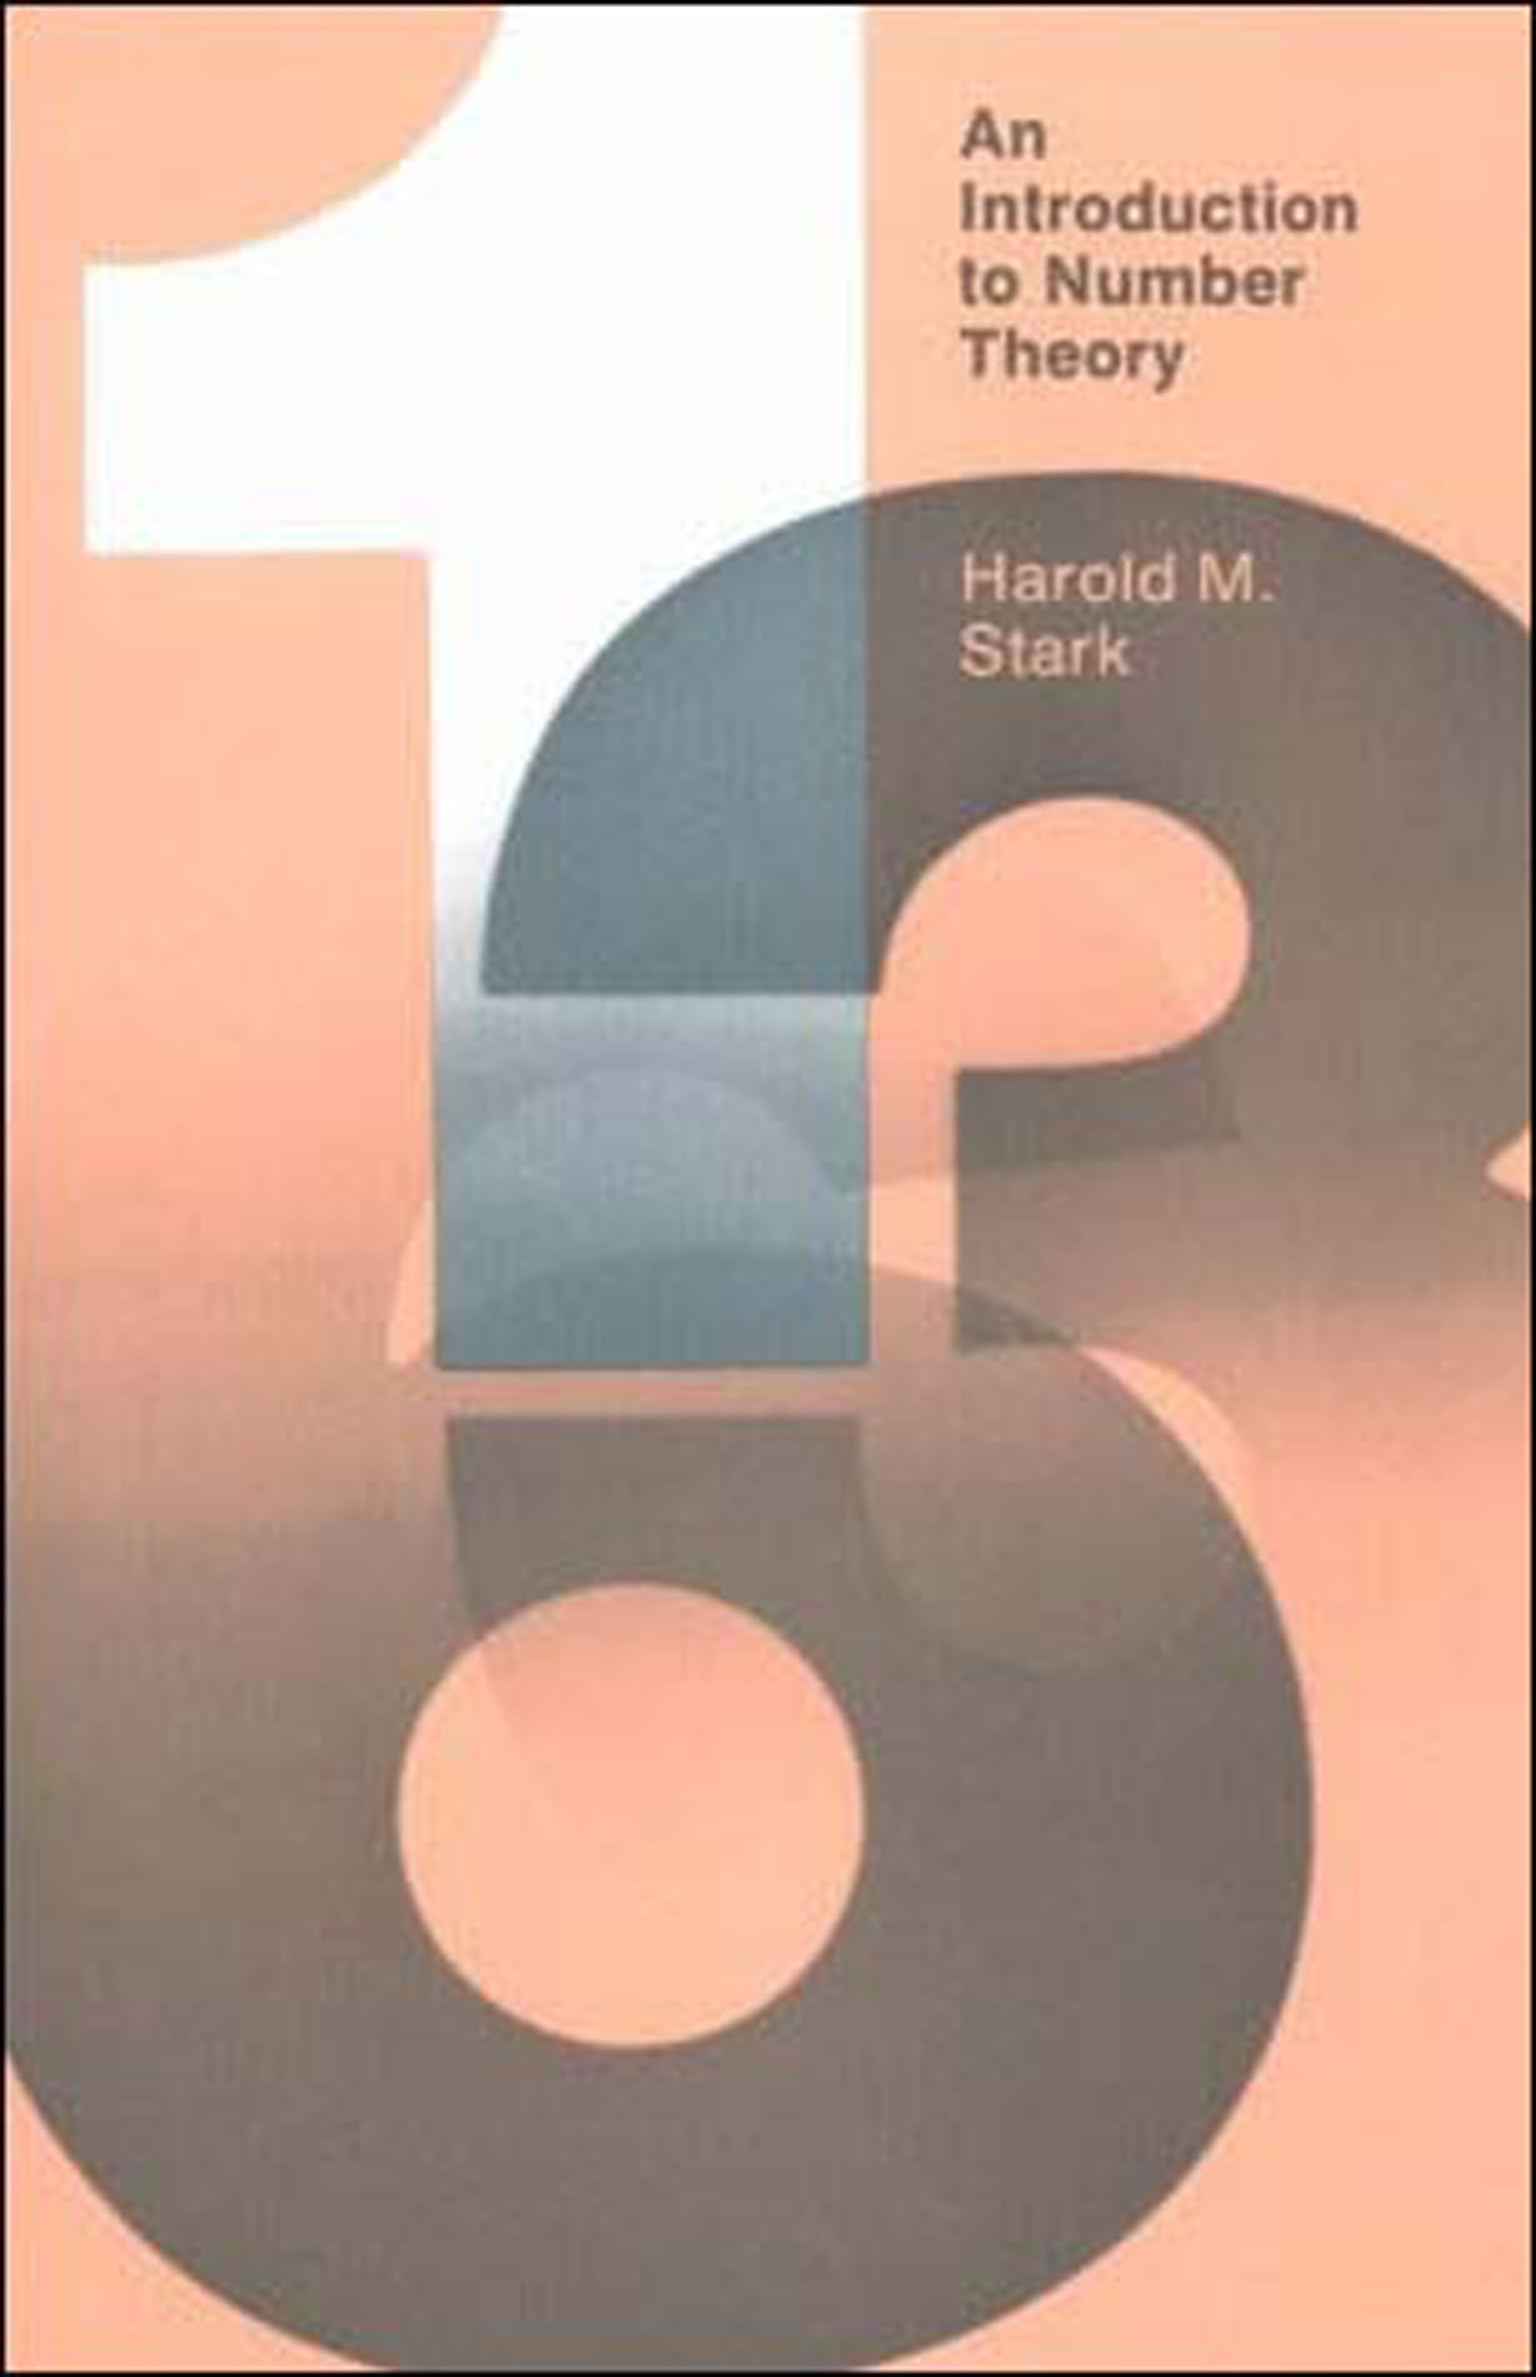 an-introduction-to-number-theory-by-harold-m-stark-penguin-books-australia